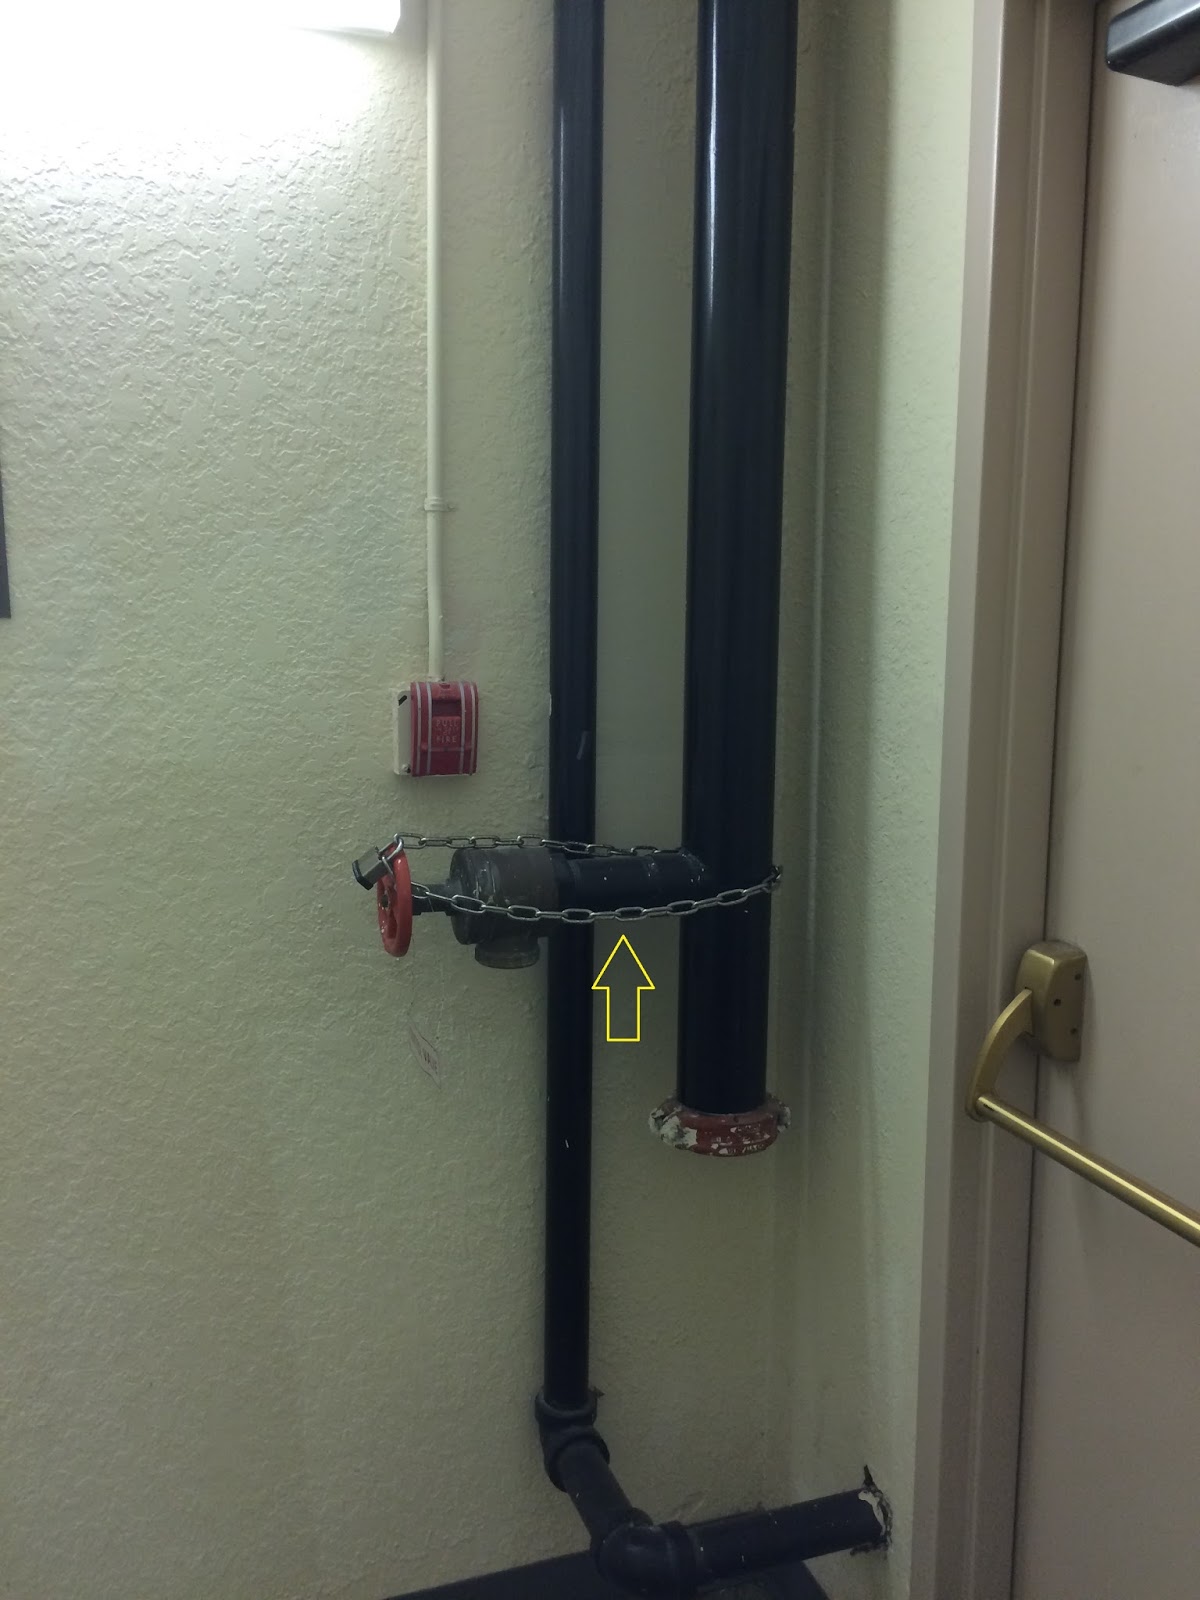 Fire Protection Deficiencies: On Standpipes